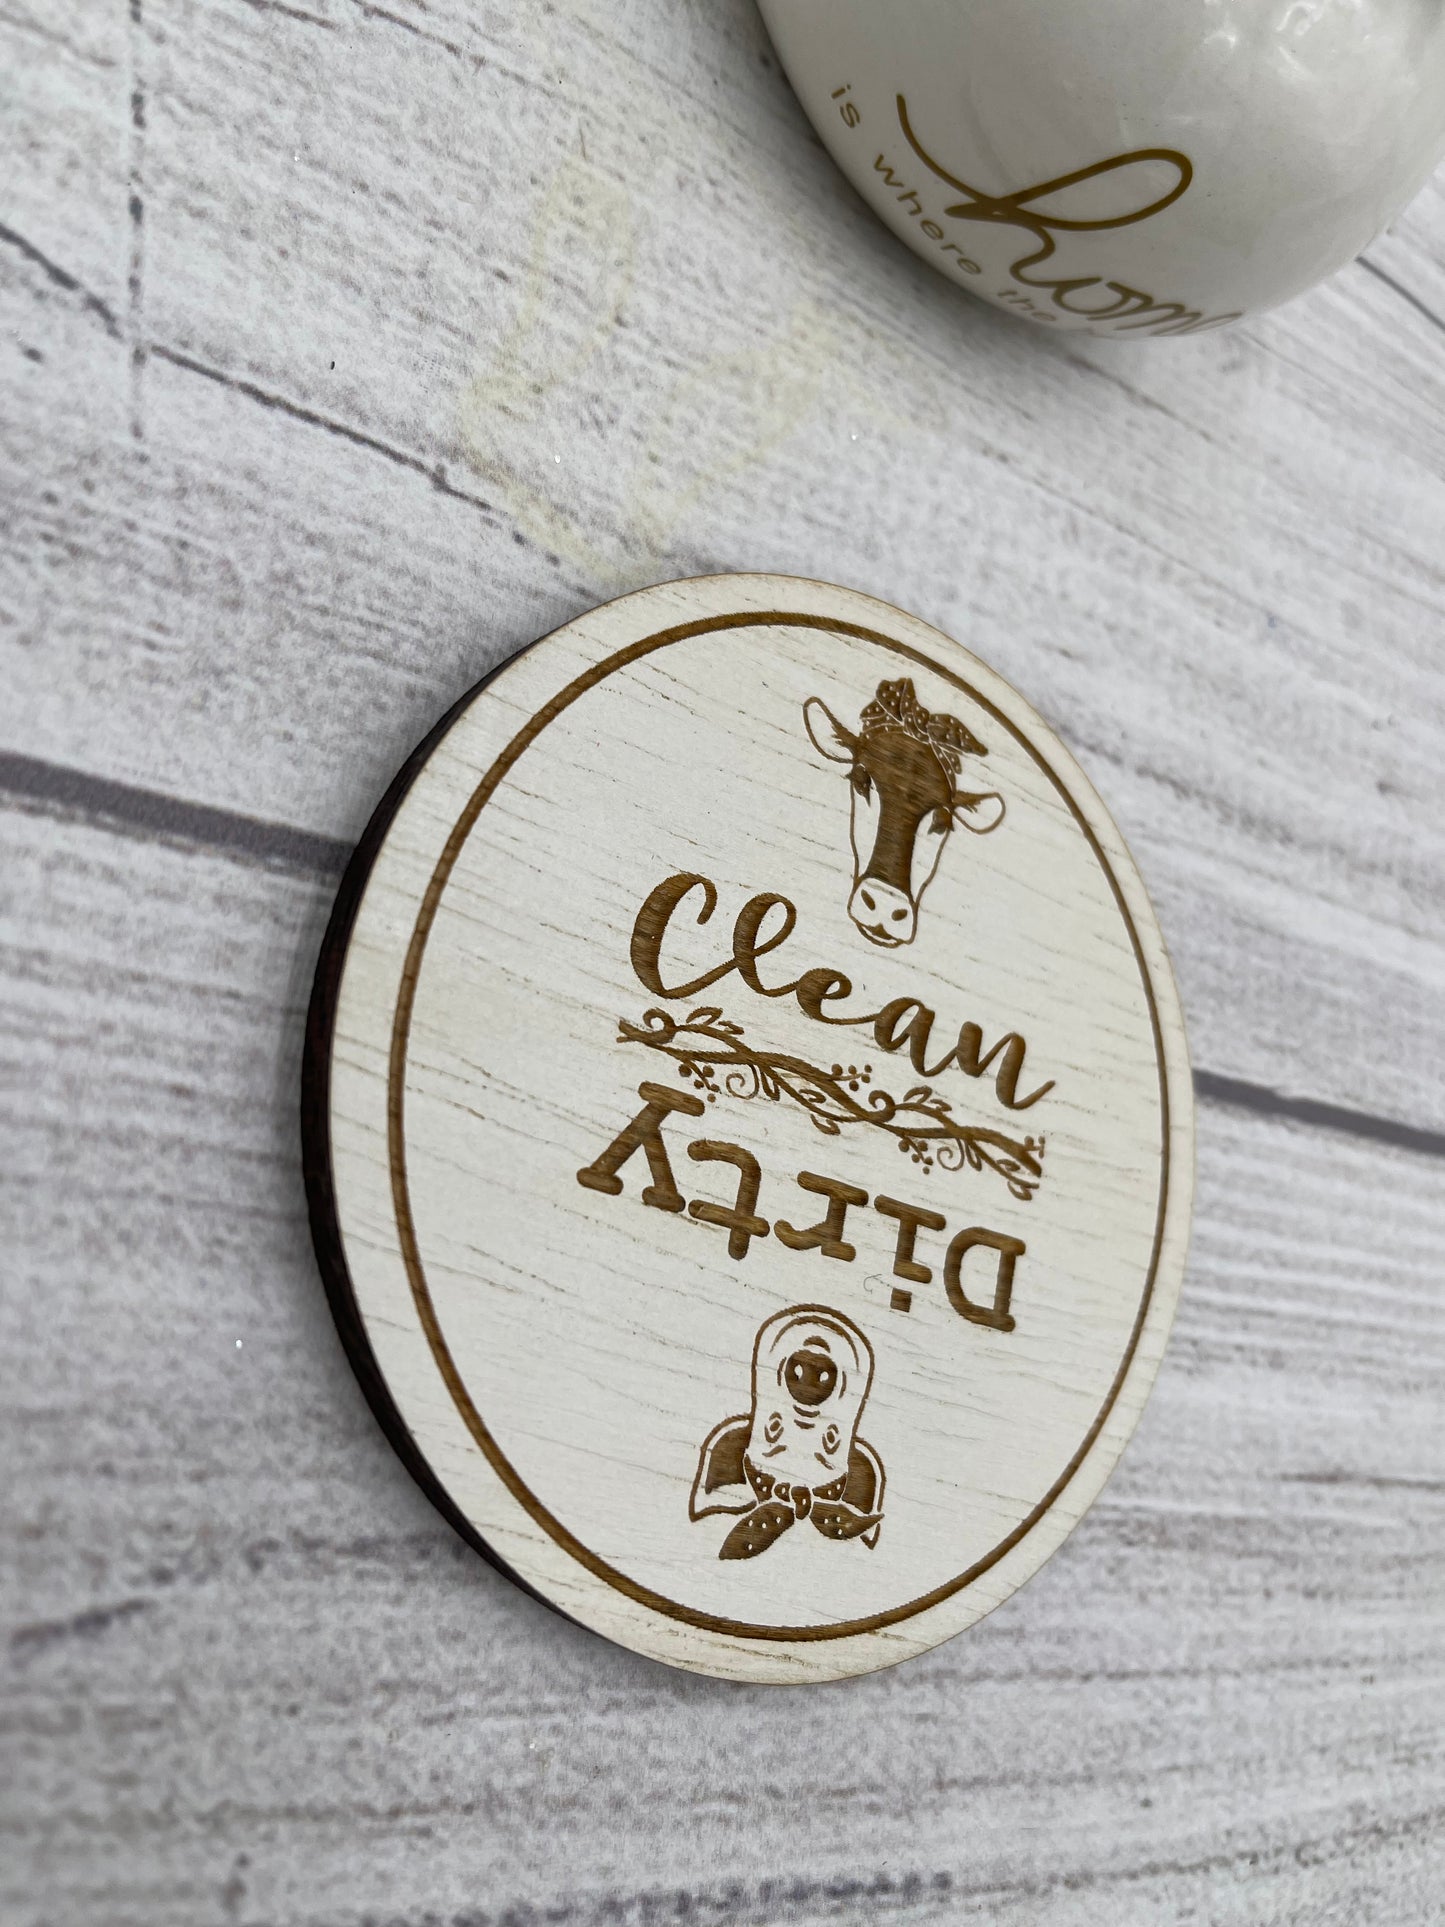 CLEAN DIRTY DISHWASHER MAGNET COW AND PIG Simple plain design magnetic Cool Cows